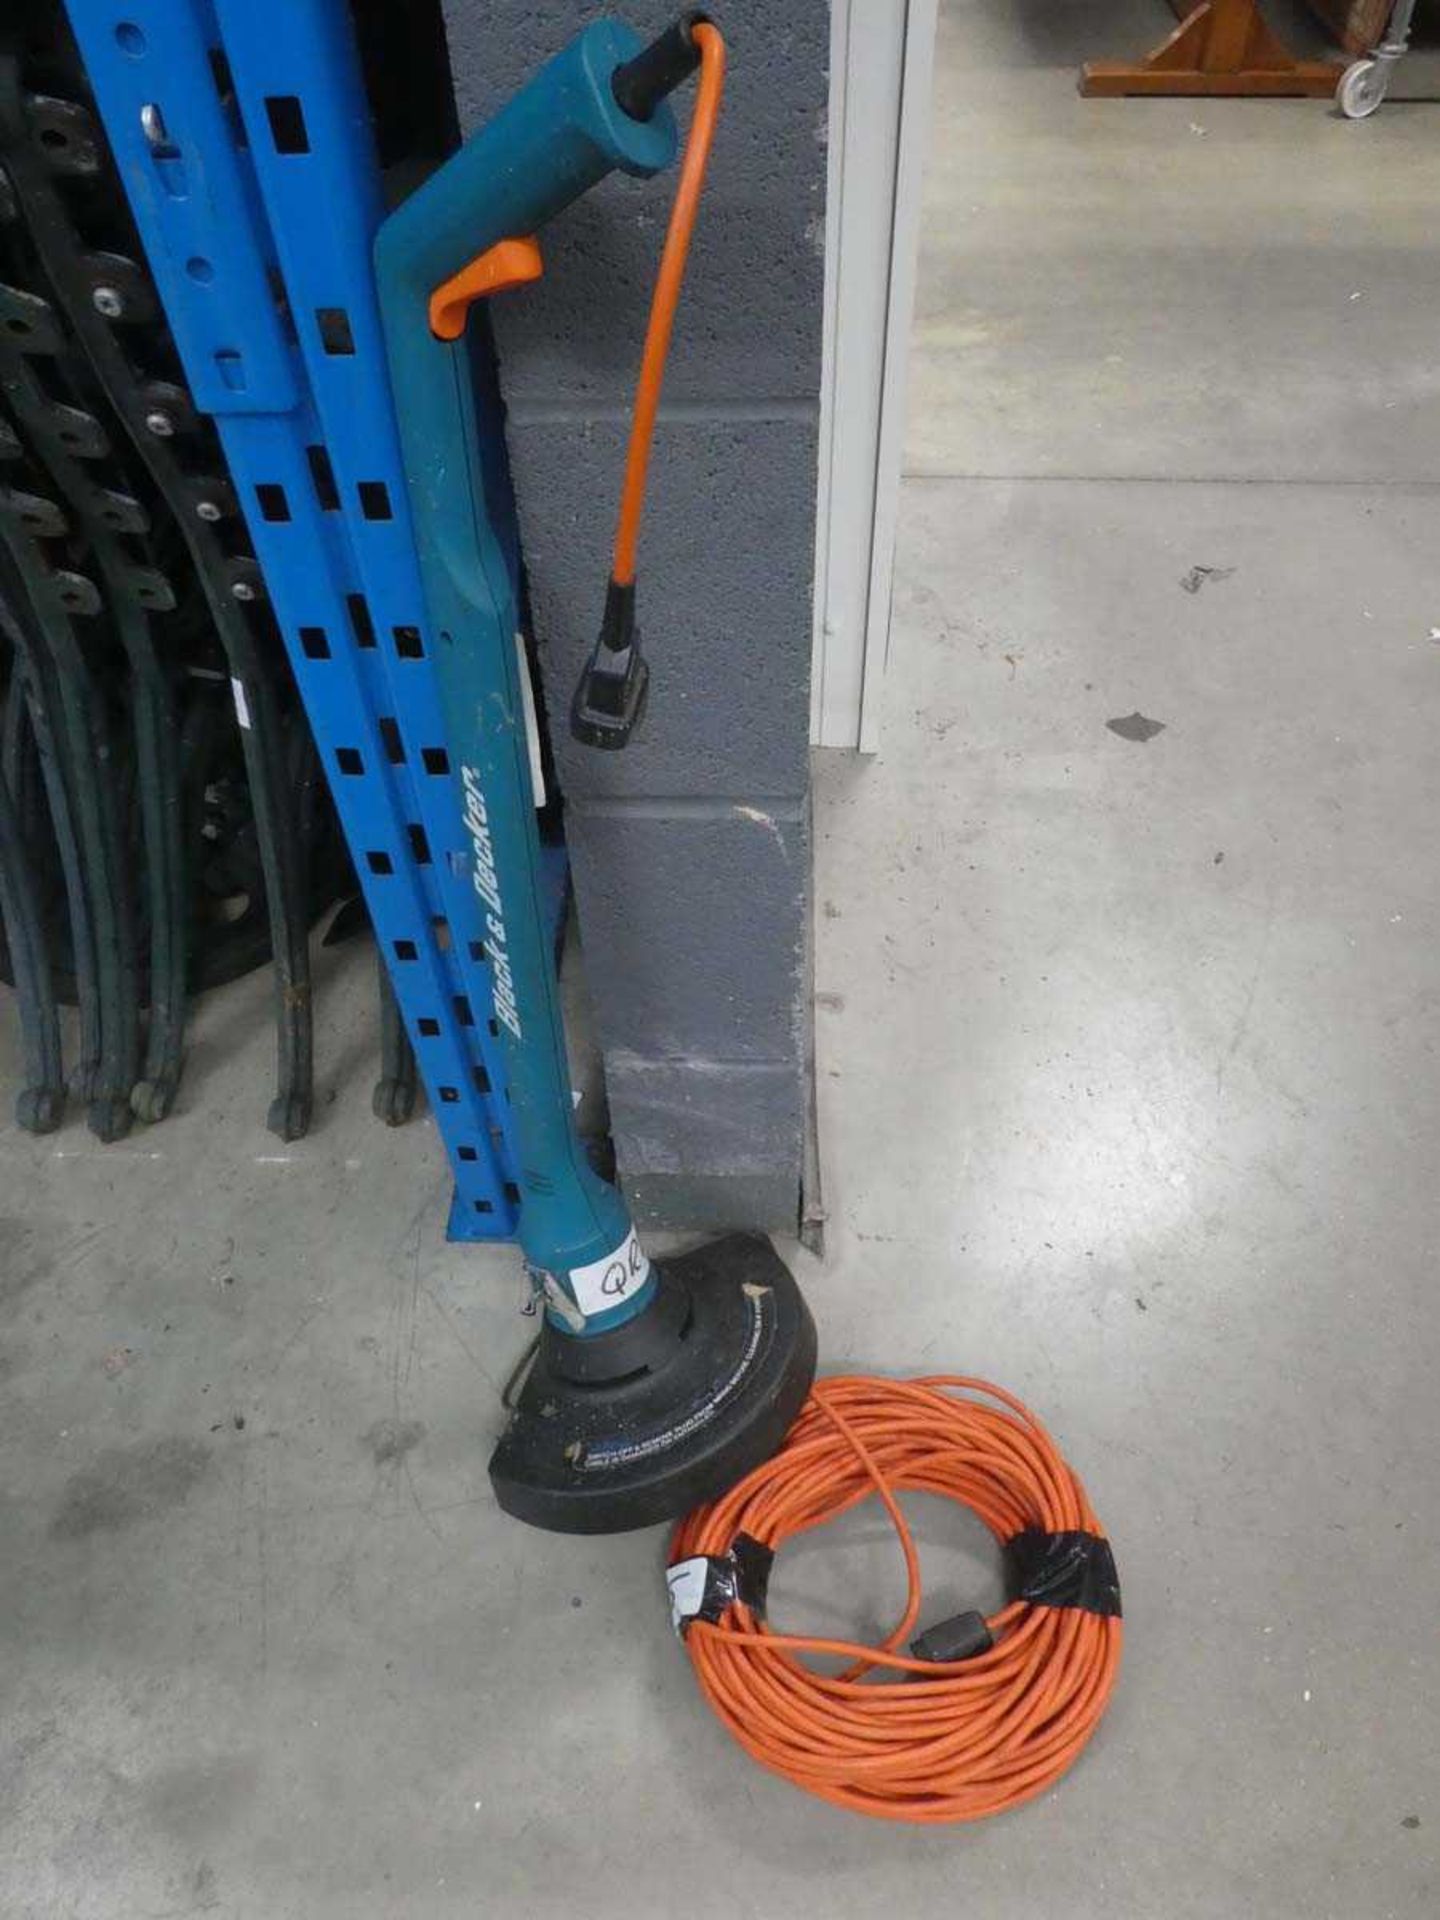 Black and Decker electric strimmer with extension leads